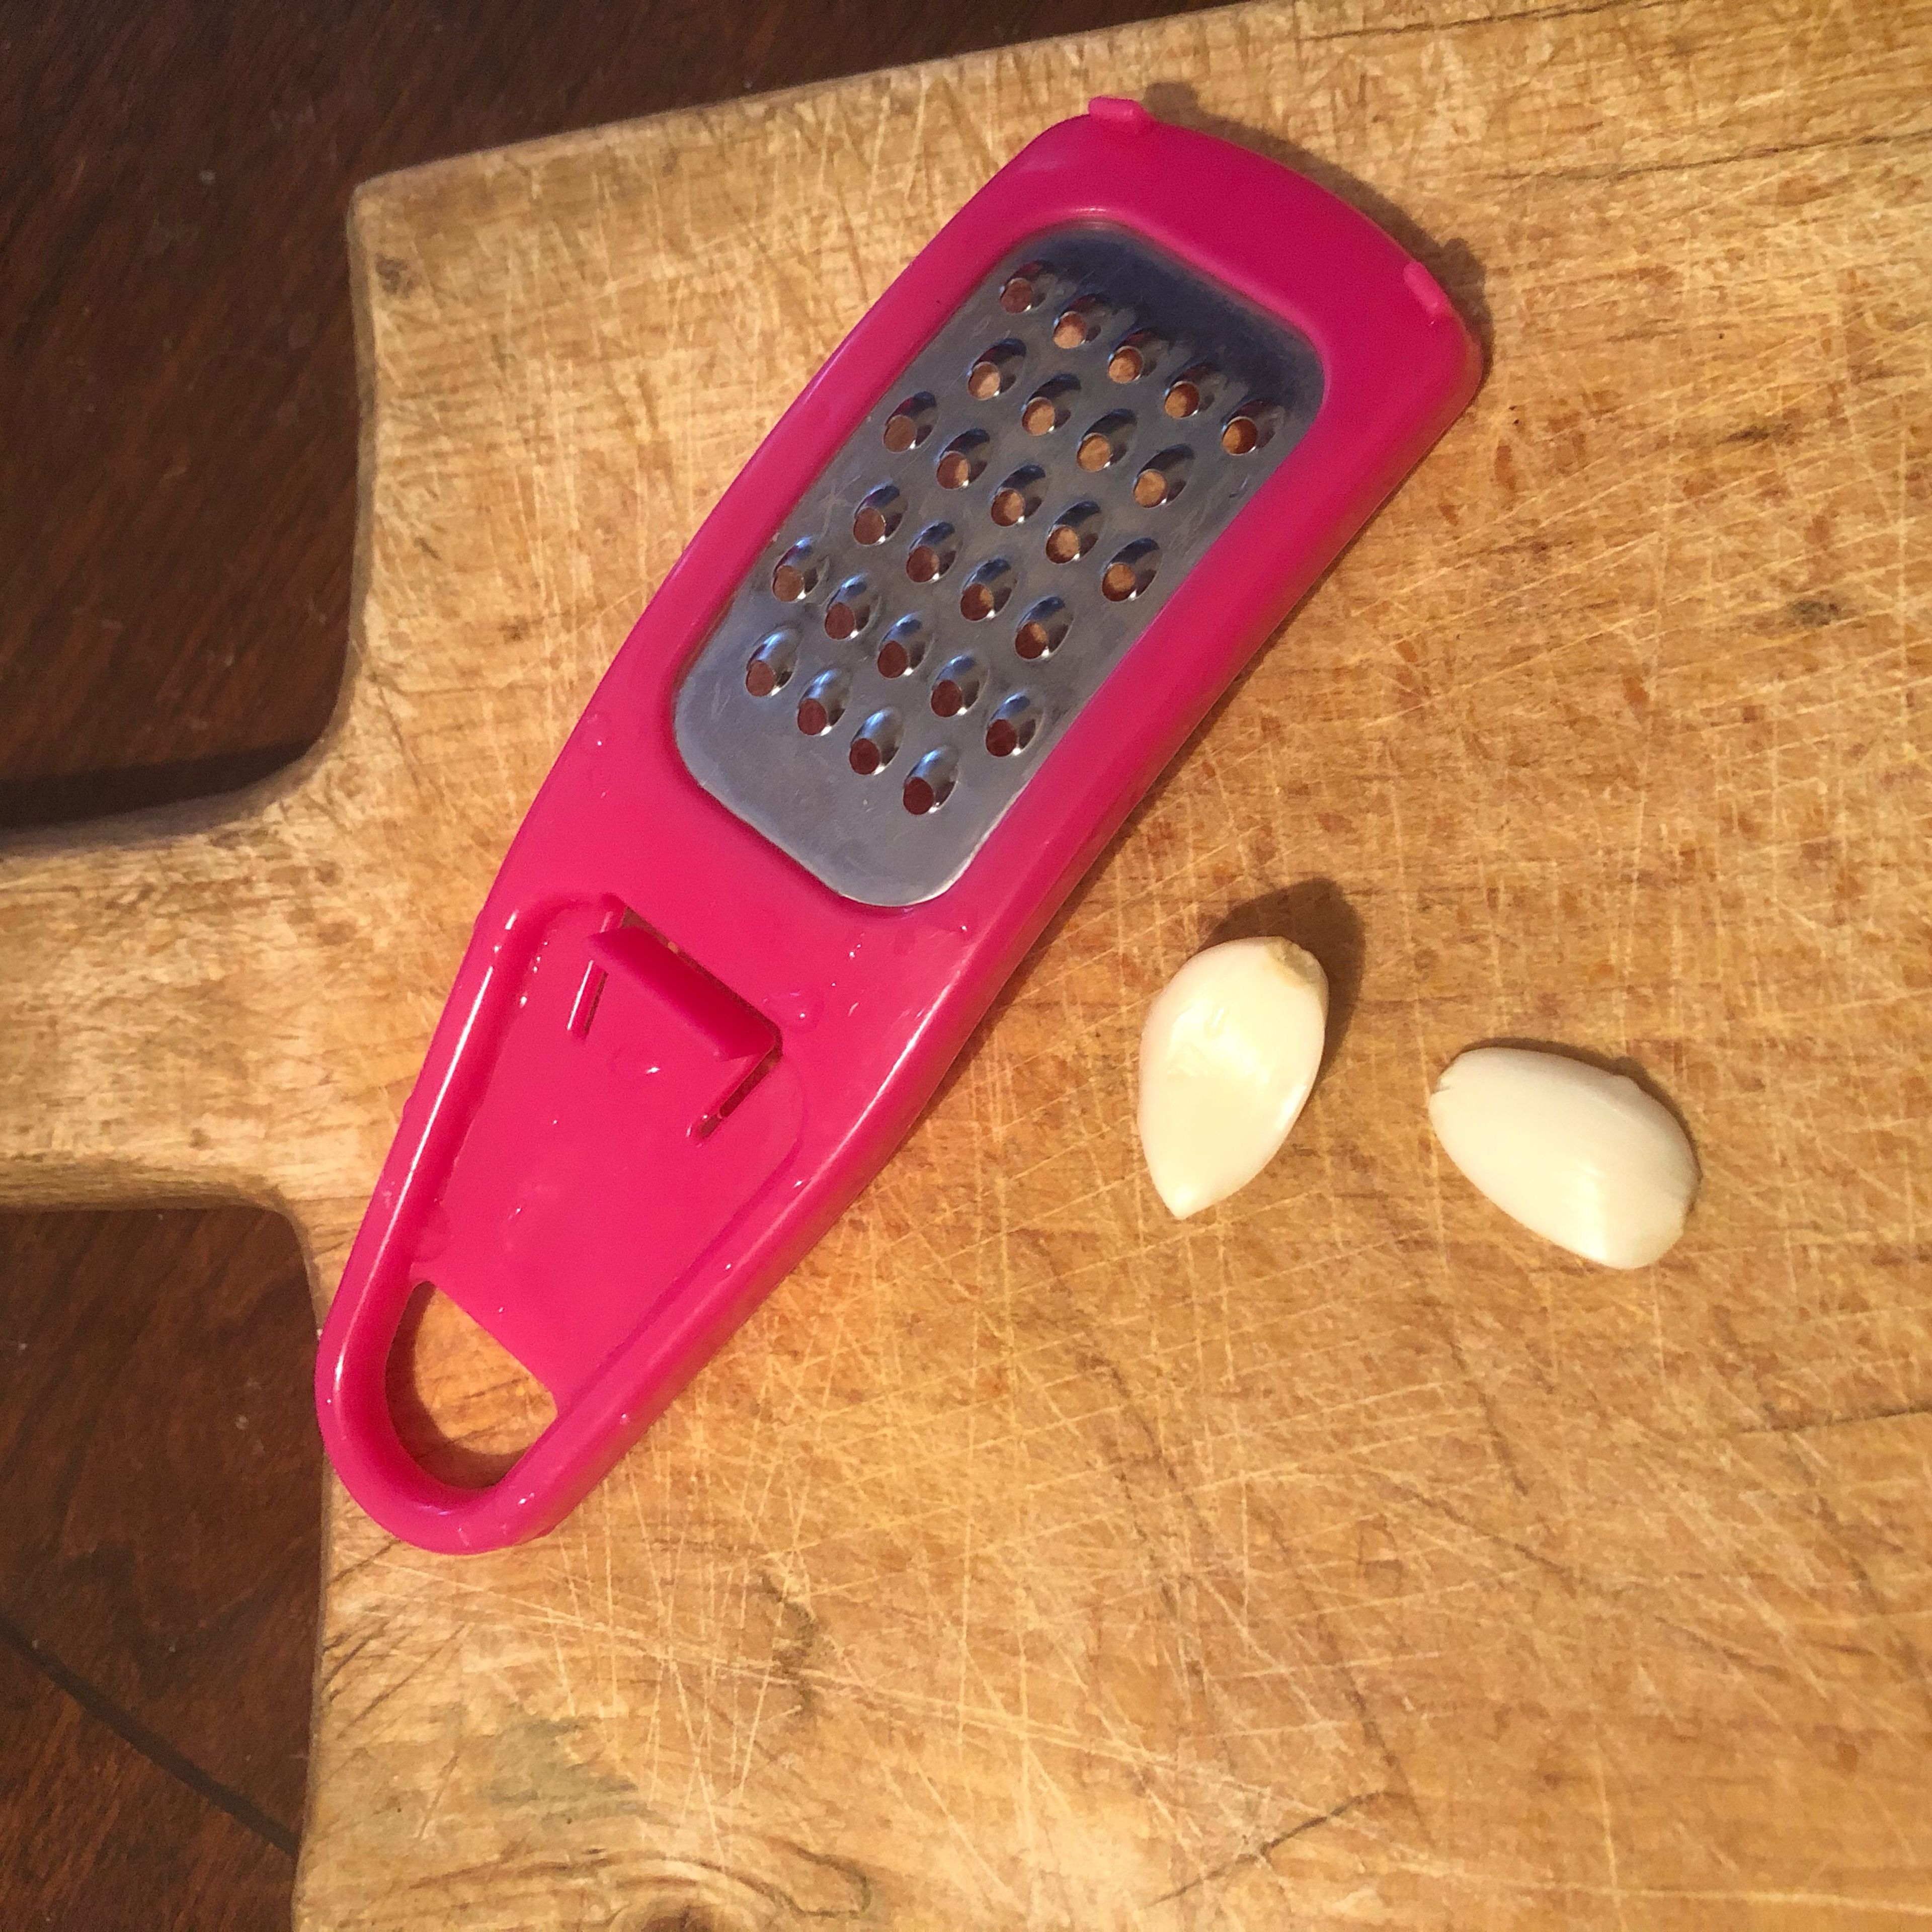 Rub the peeled garlic cloves up and down the grater until the garlic is grated or use knife to finely chop the garlic